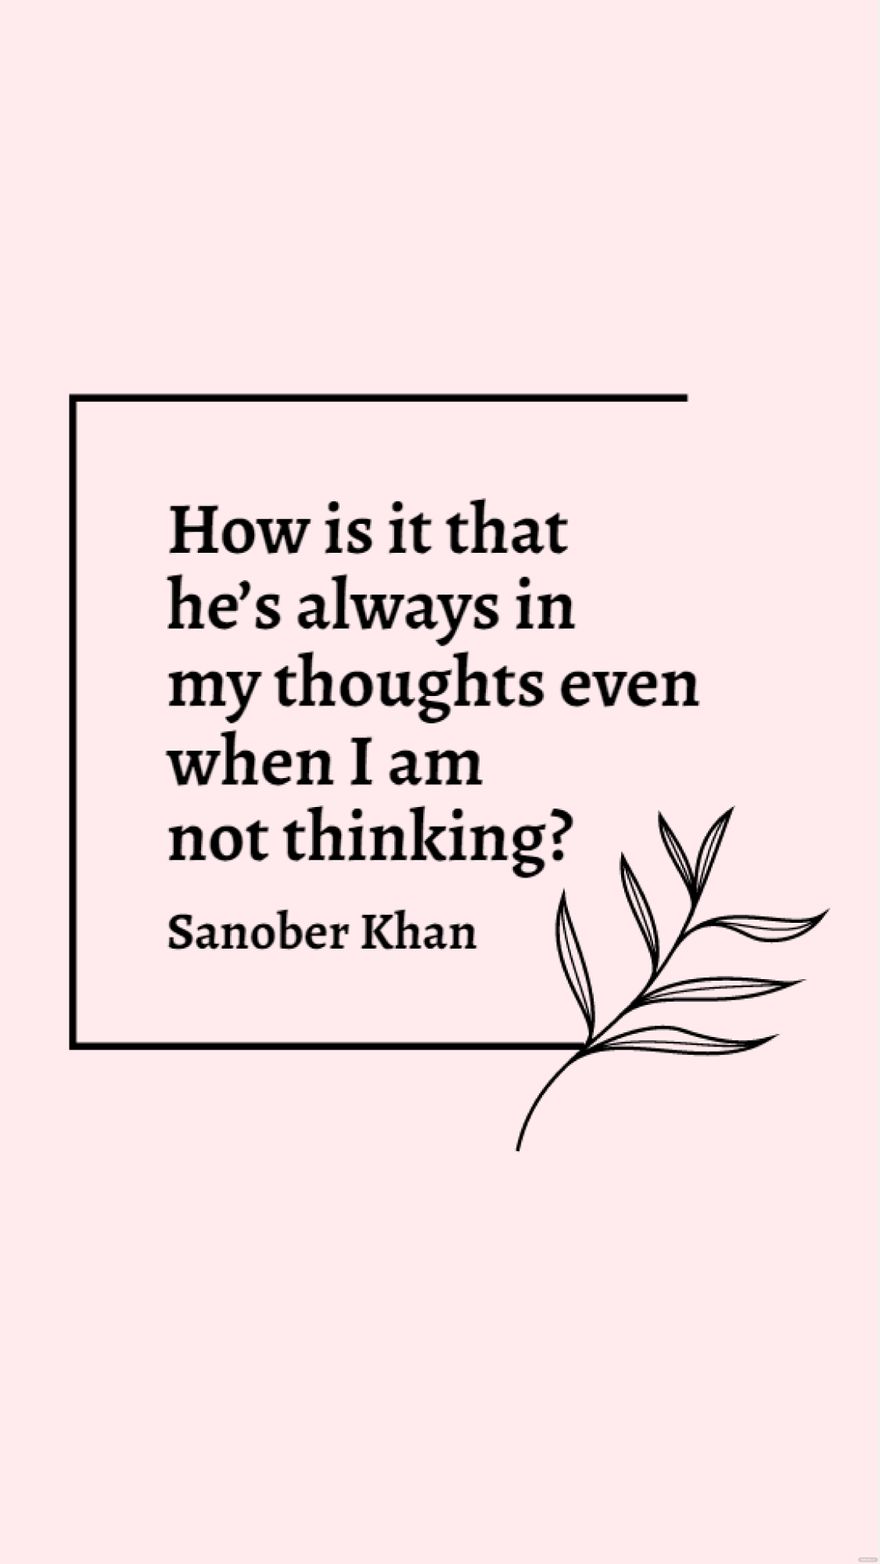 Free Sanober Khan - How is it that he’s always in my thoughts even when I am not thinking?